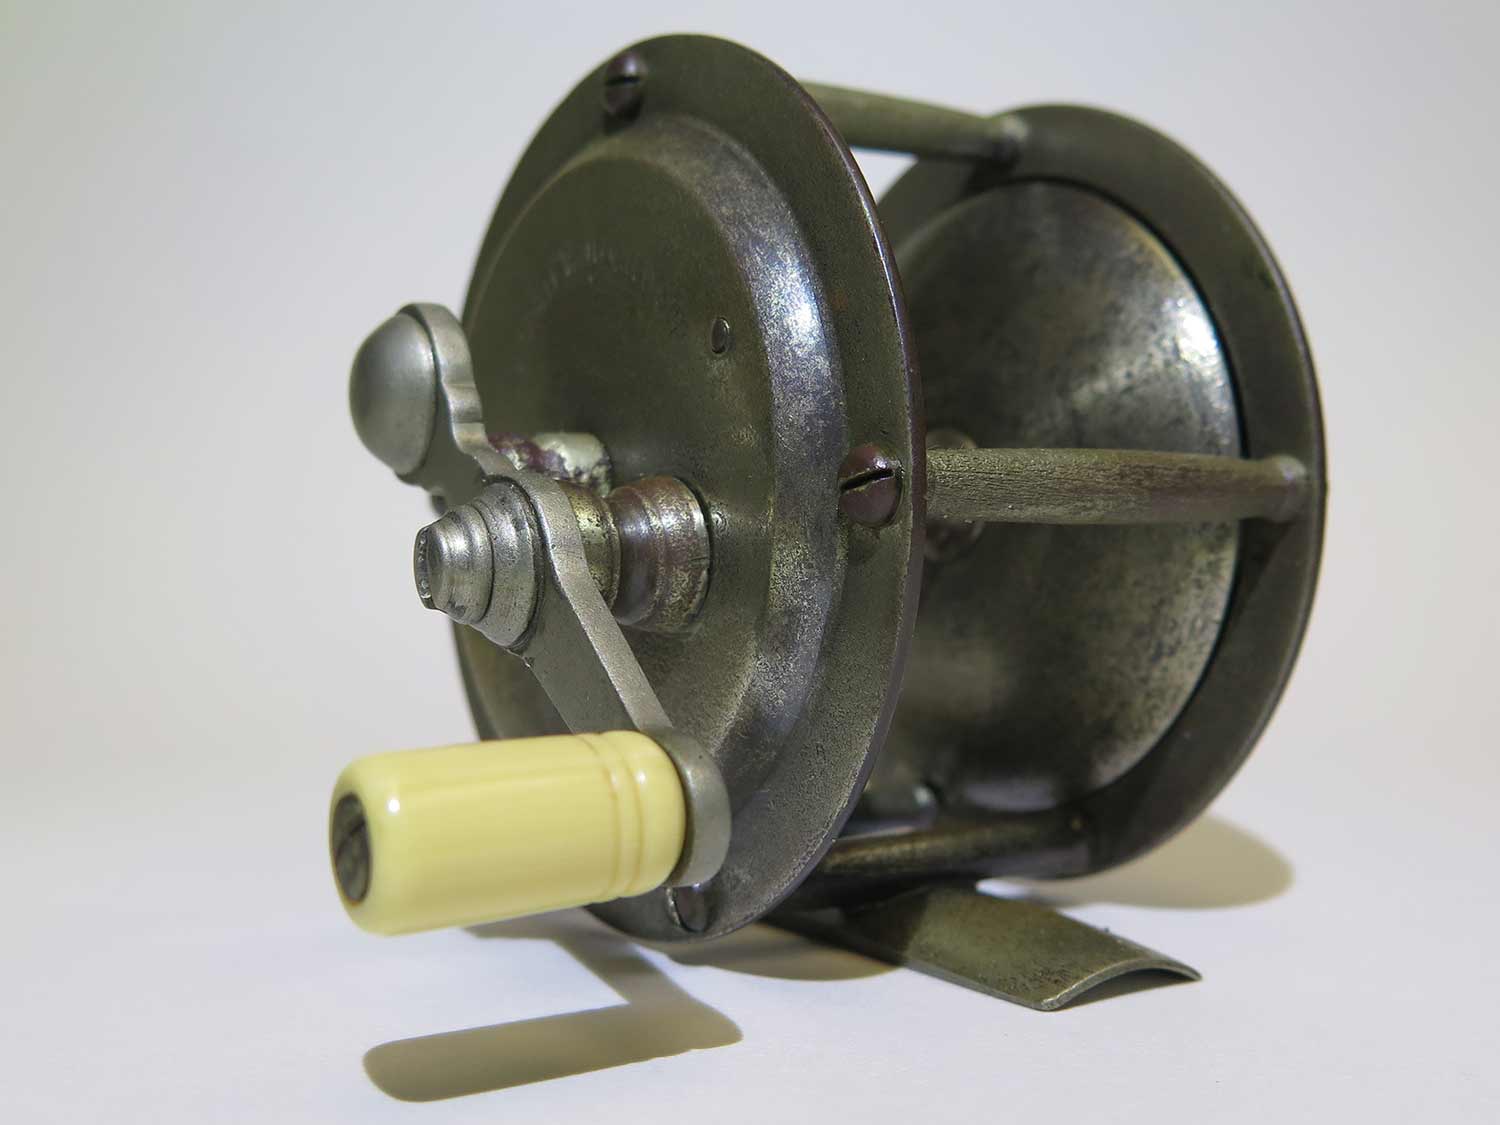 Old, Weird, Historical, and Unusual Spinning Reels -- - Page 22